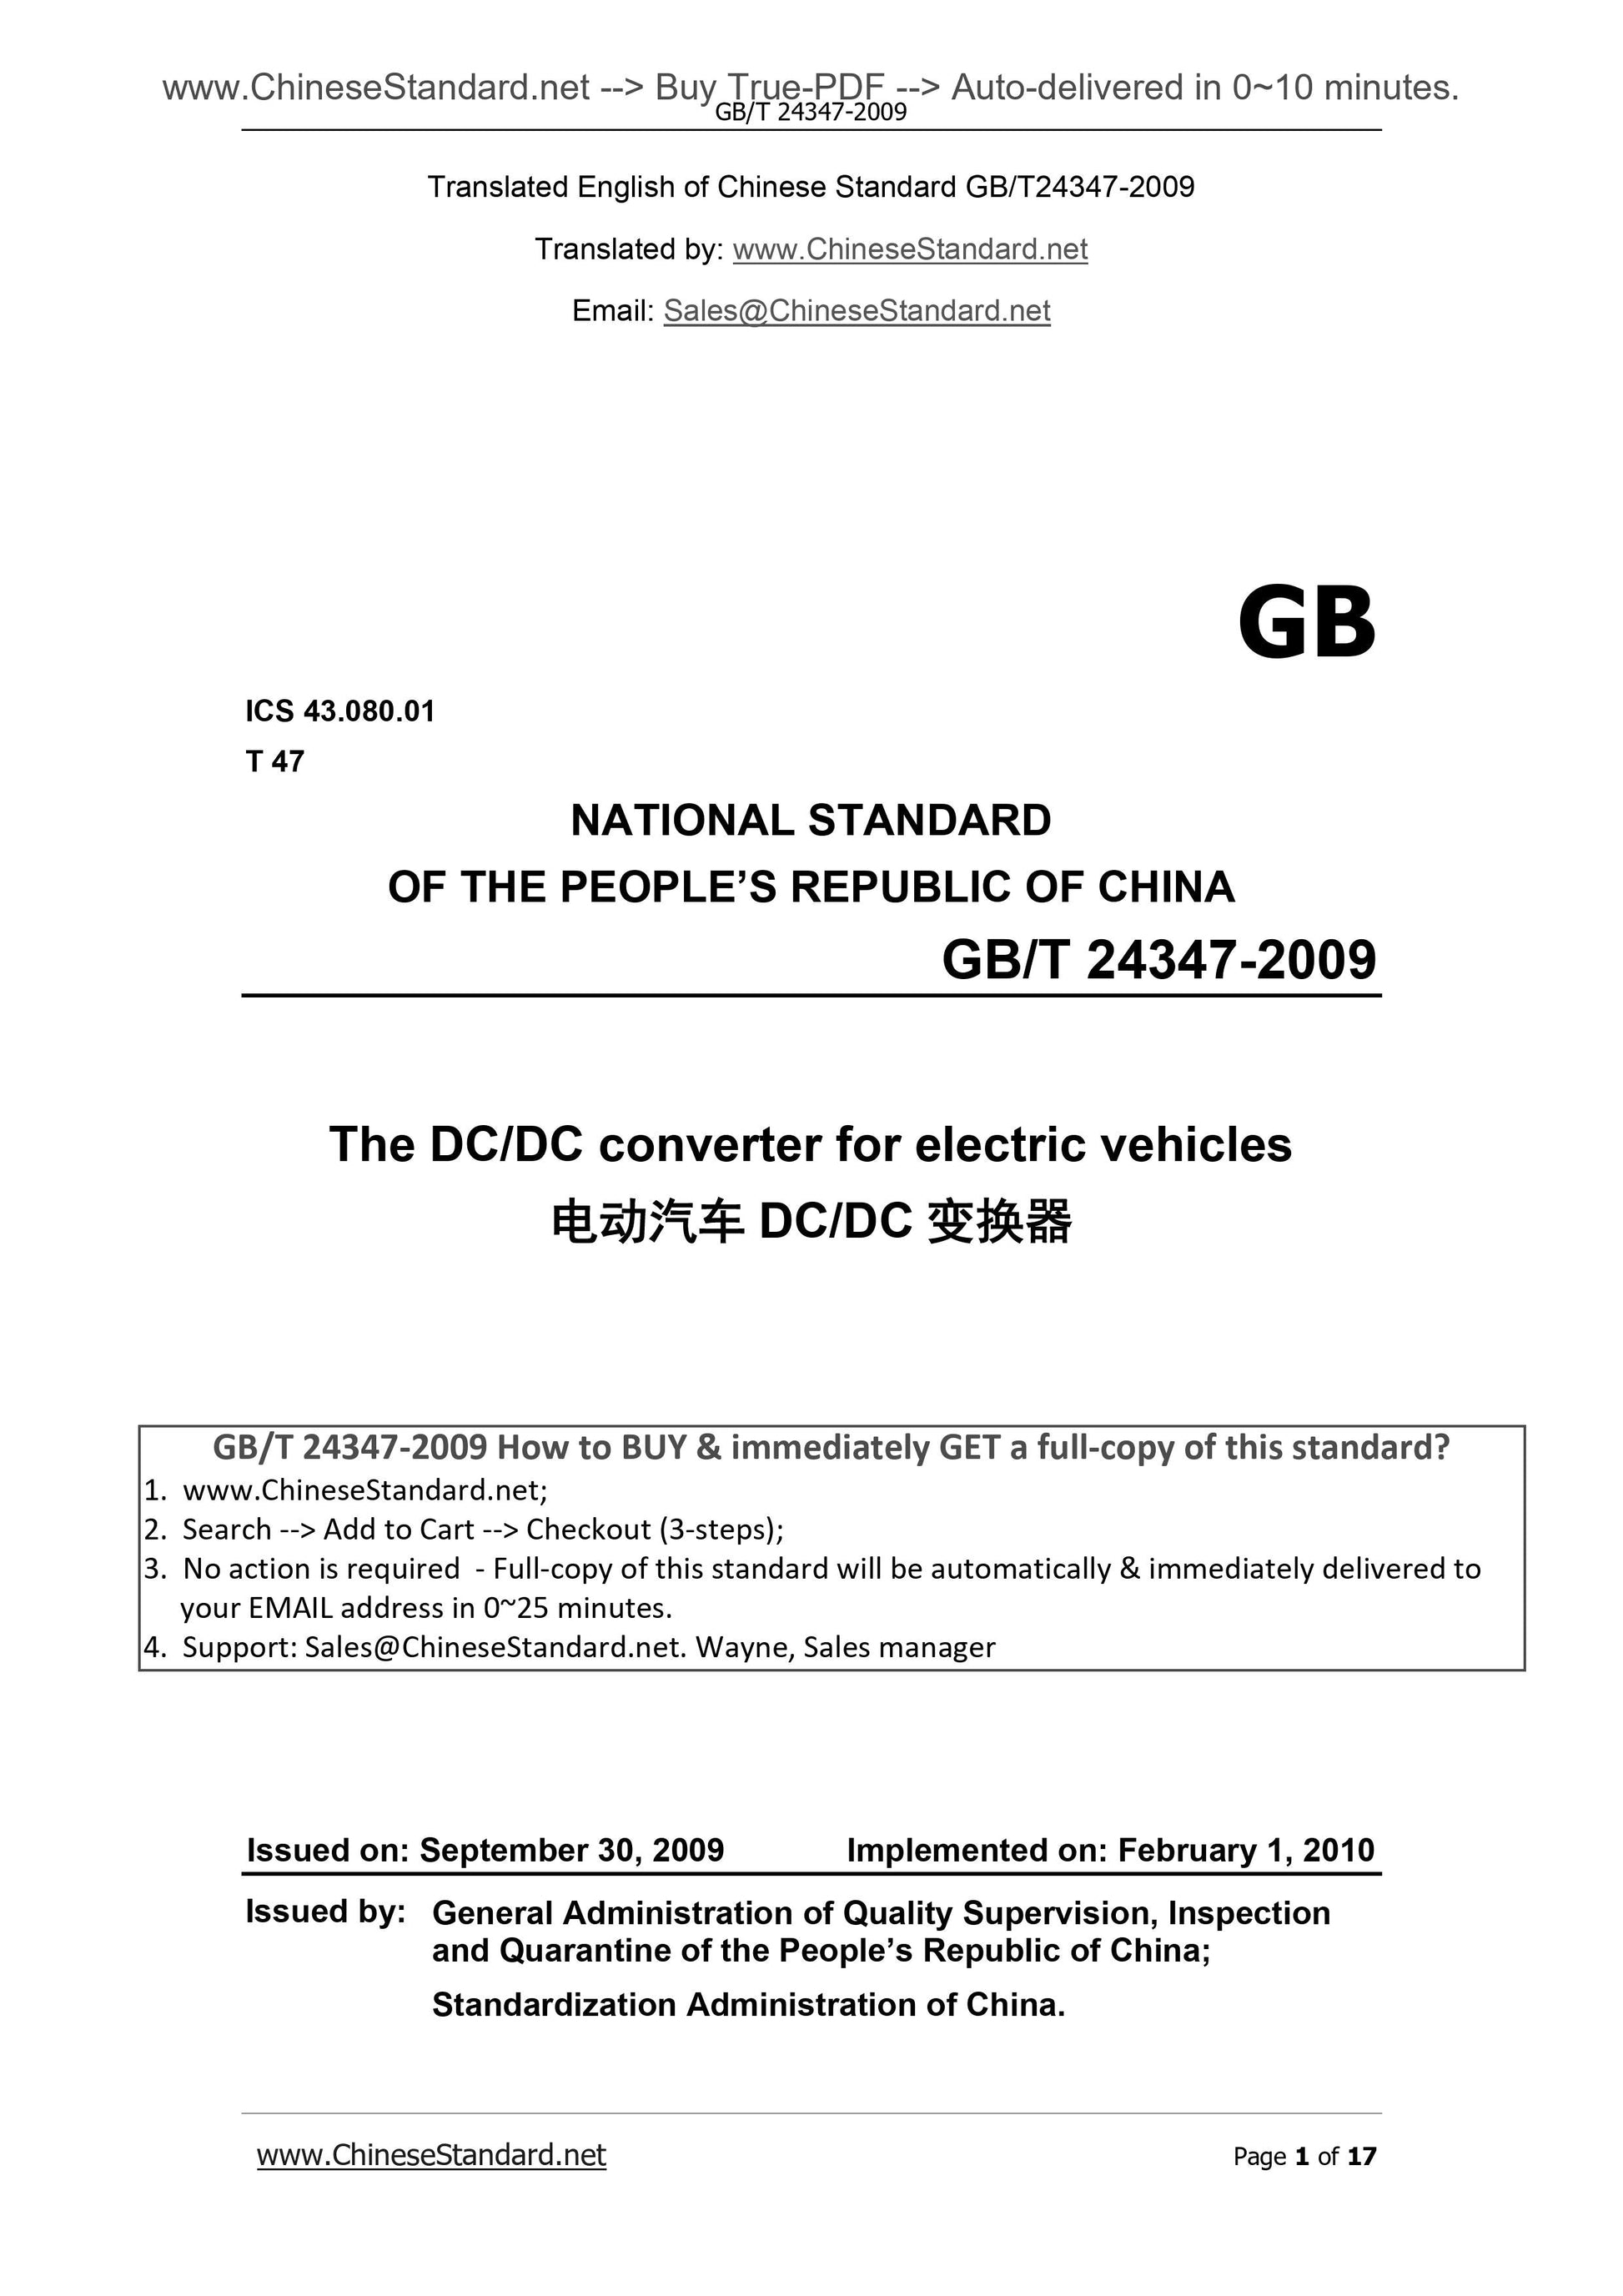 GB/T 24347-2009 Page 1